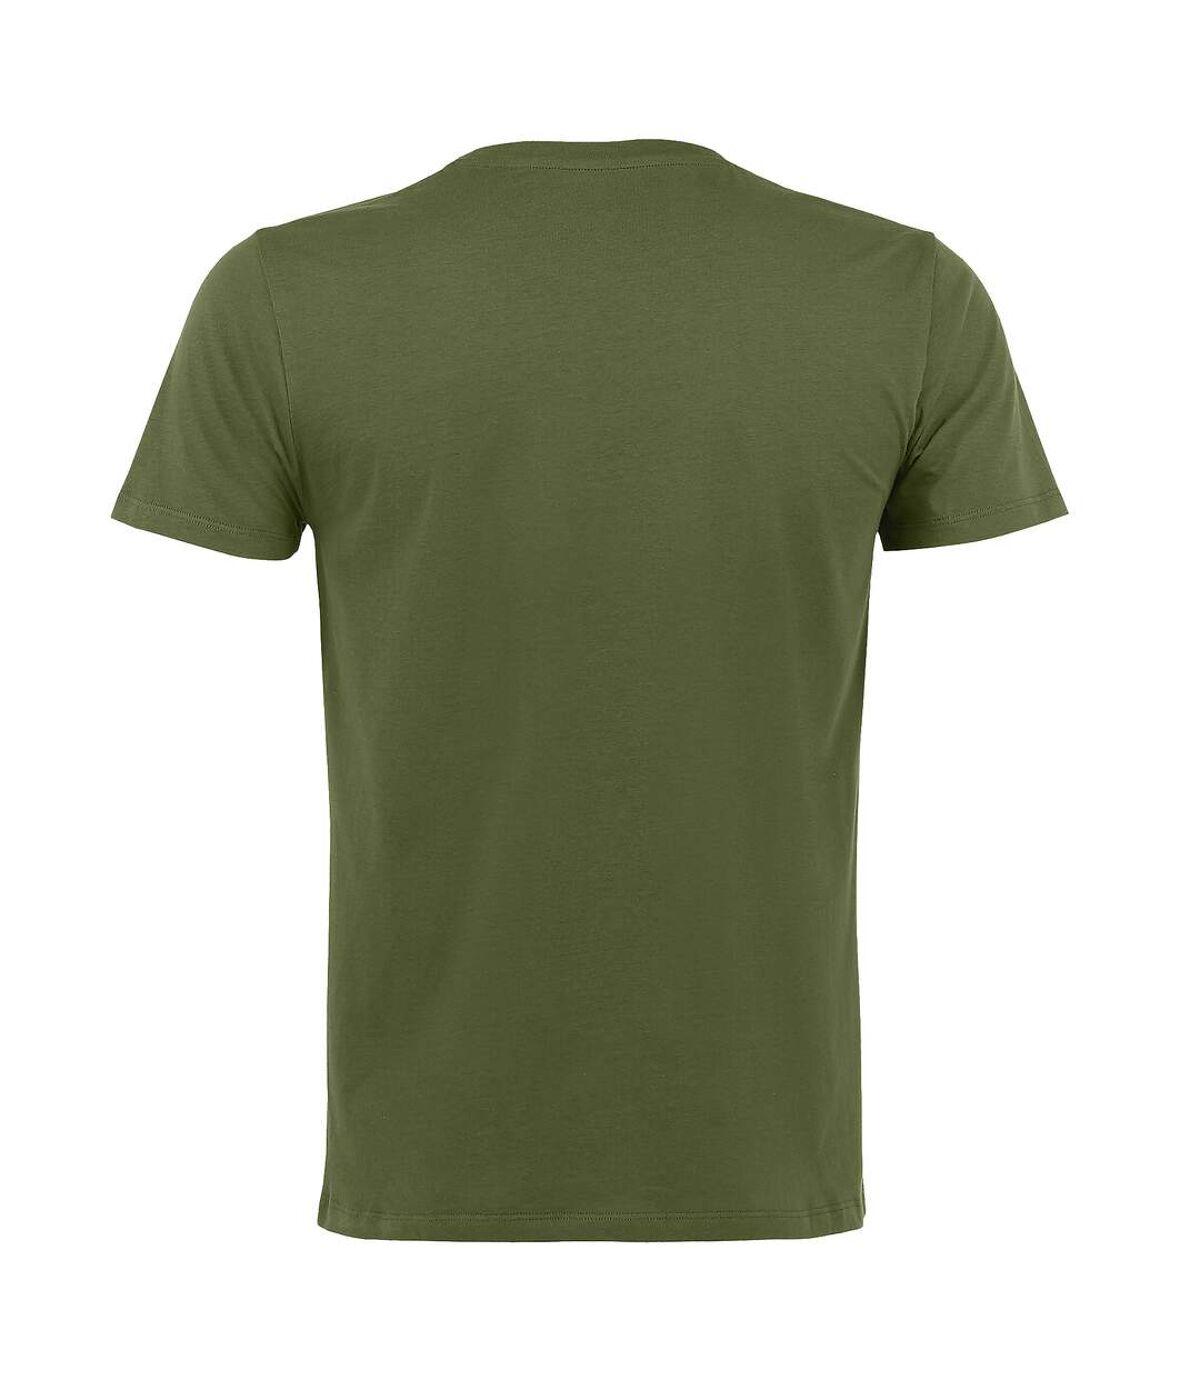 Men's T-Shirts | SOLS | Khaki | From only £7.93